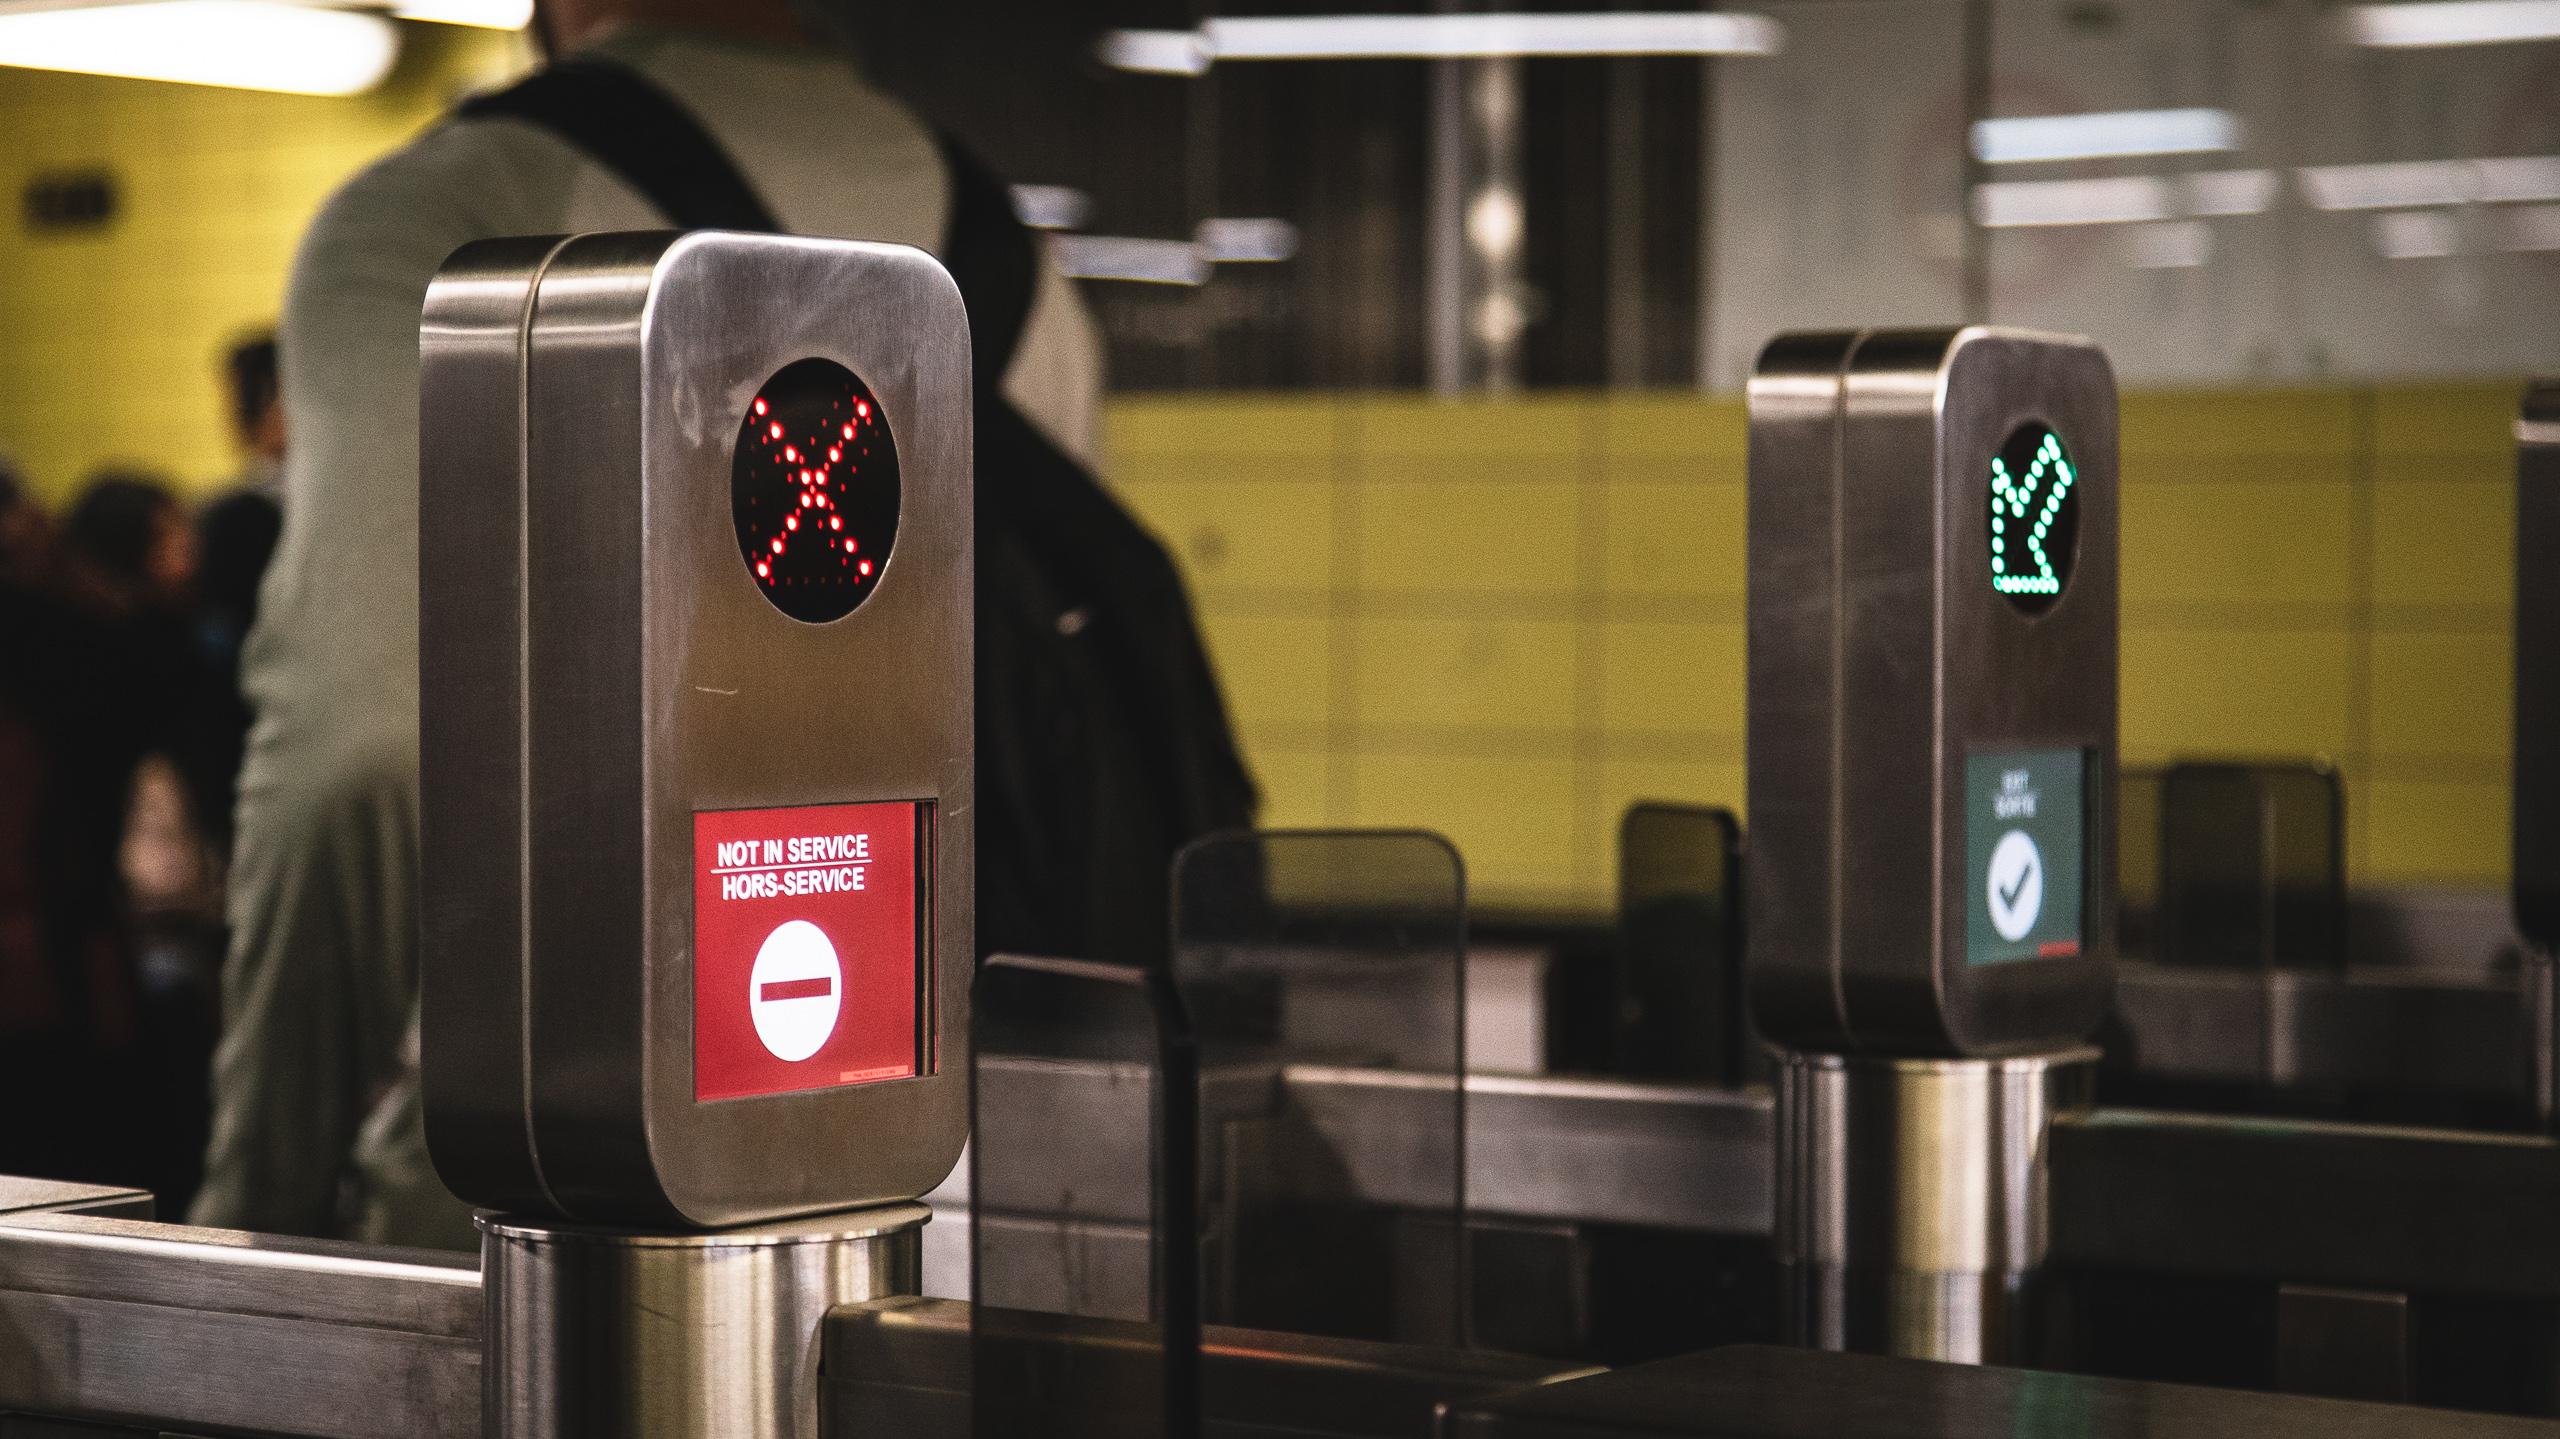 A photo of an out of service Presto machine in a TTCsubway station